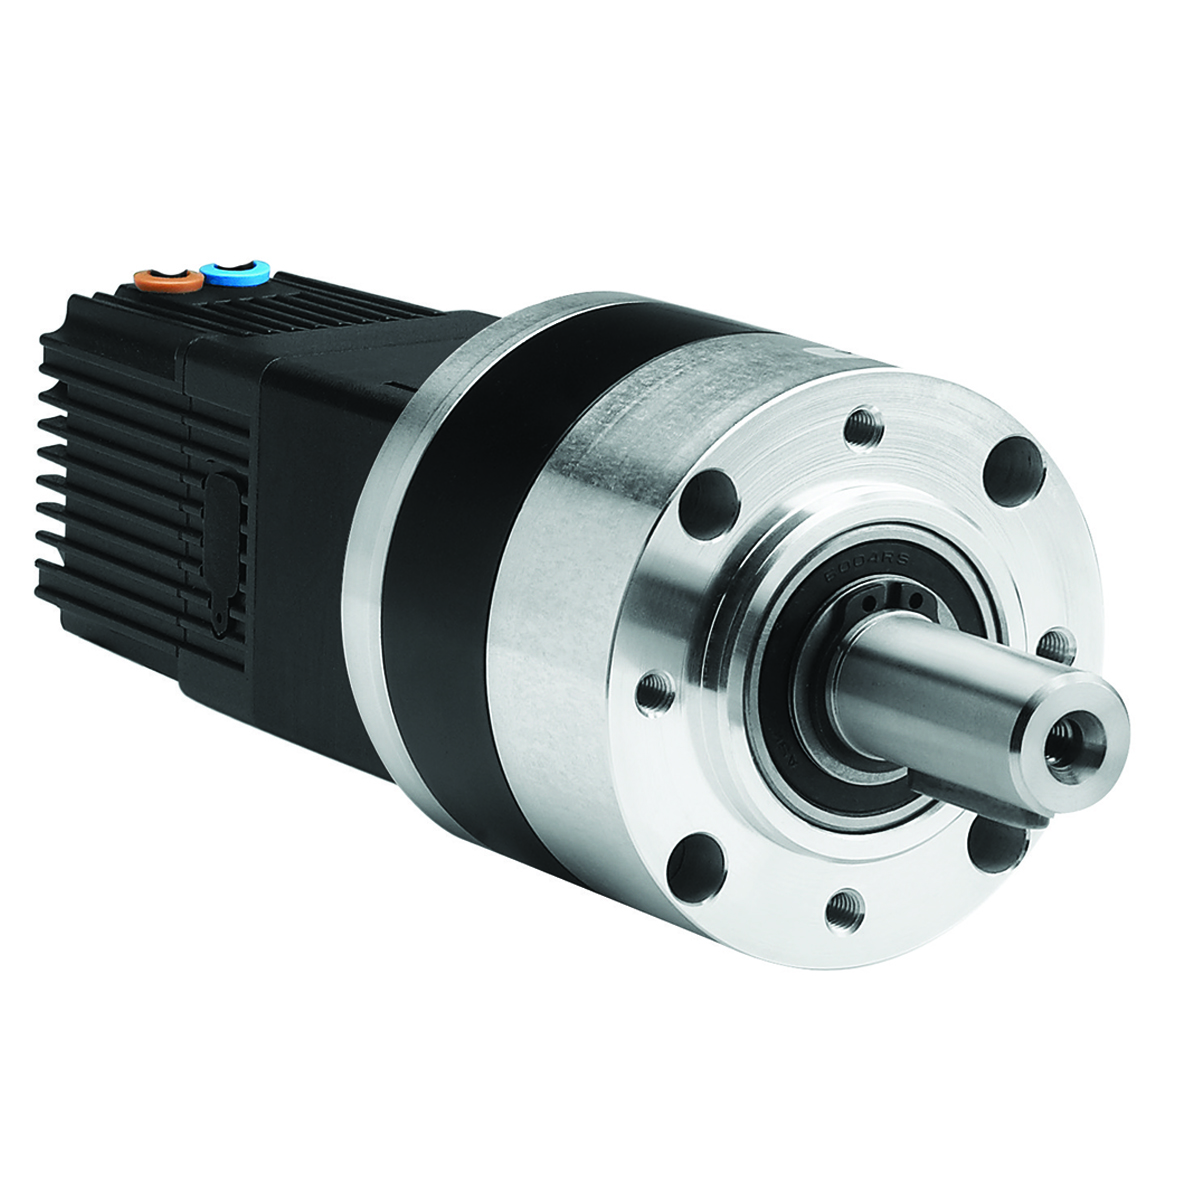 SQ57 Motor 150W 12-32Vdc + Drive TNi21 PWM + Gearbox P81 - 3 stages ratio 99.52